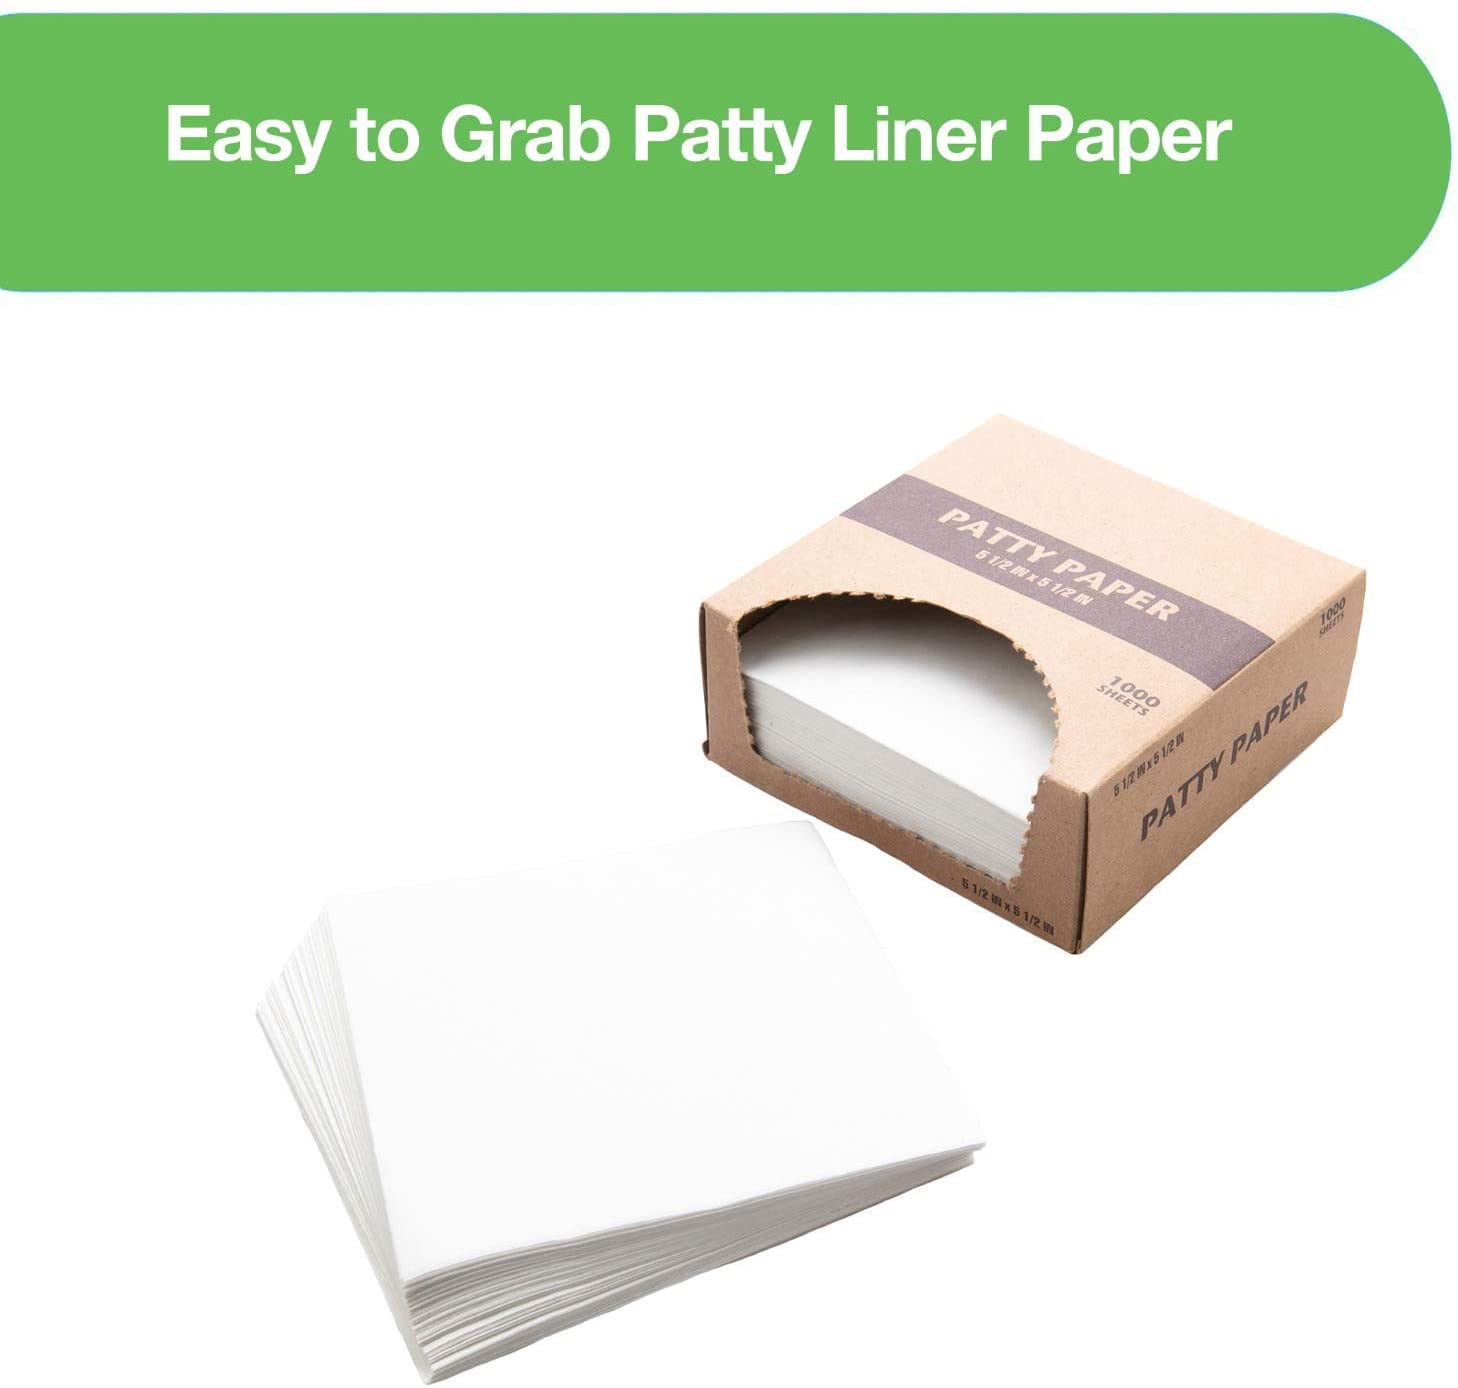 Burger Patty Liner Paper 5.5 x 5.5 Inches - Square Patty Papers, Baking Parchment Hamburger Patty Papers, Cookies and more!